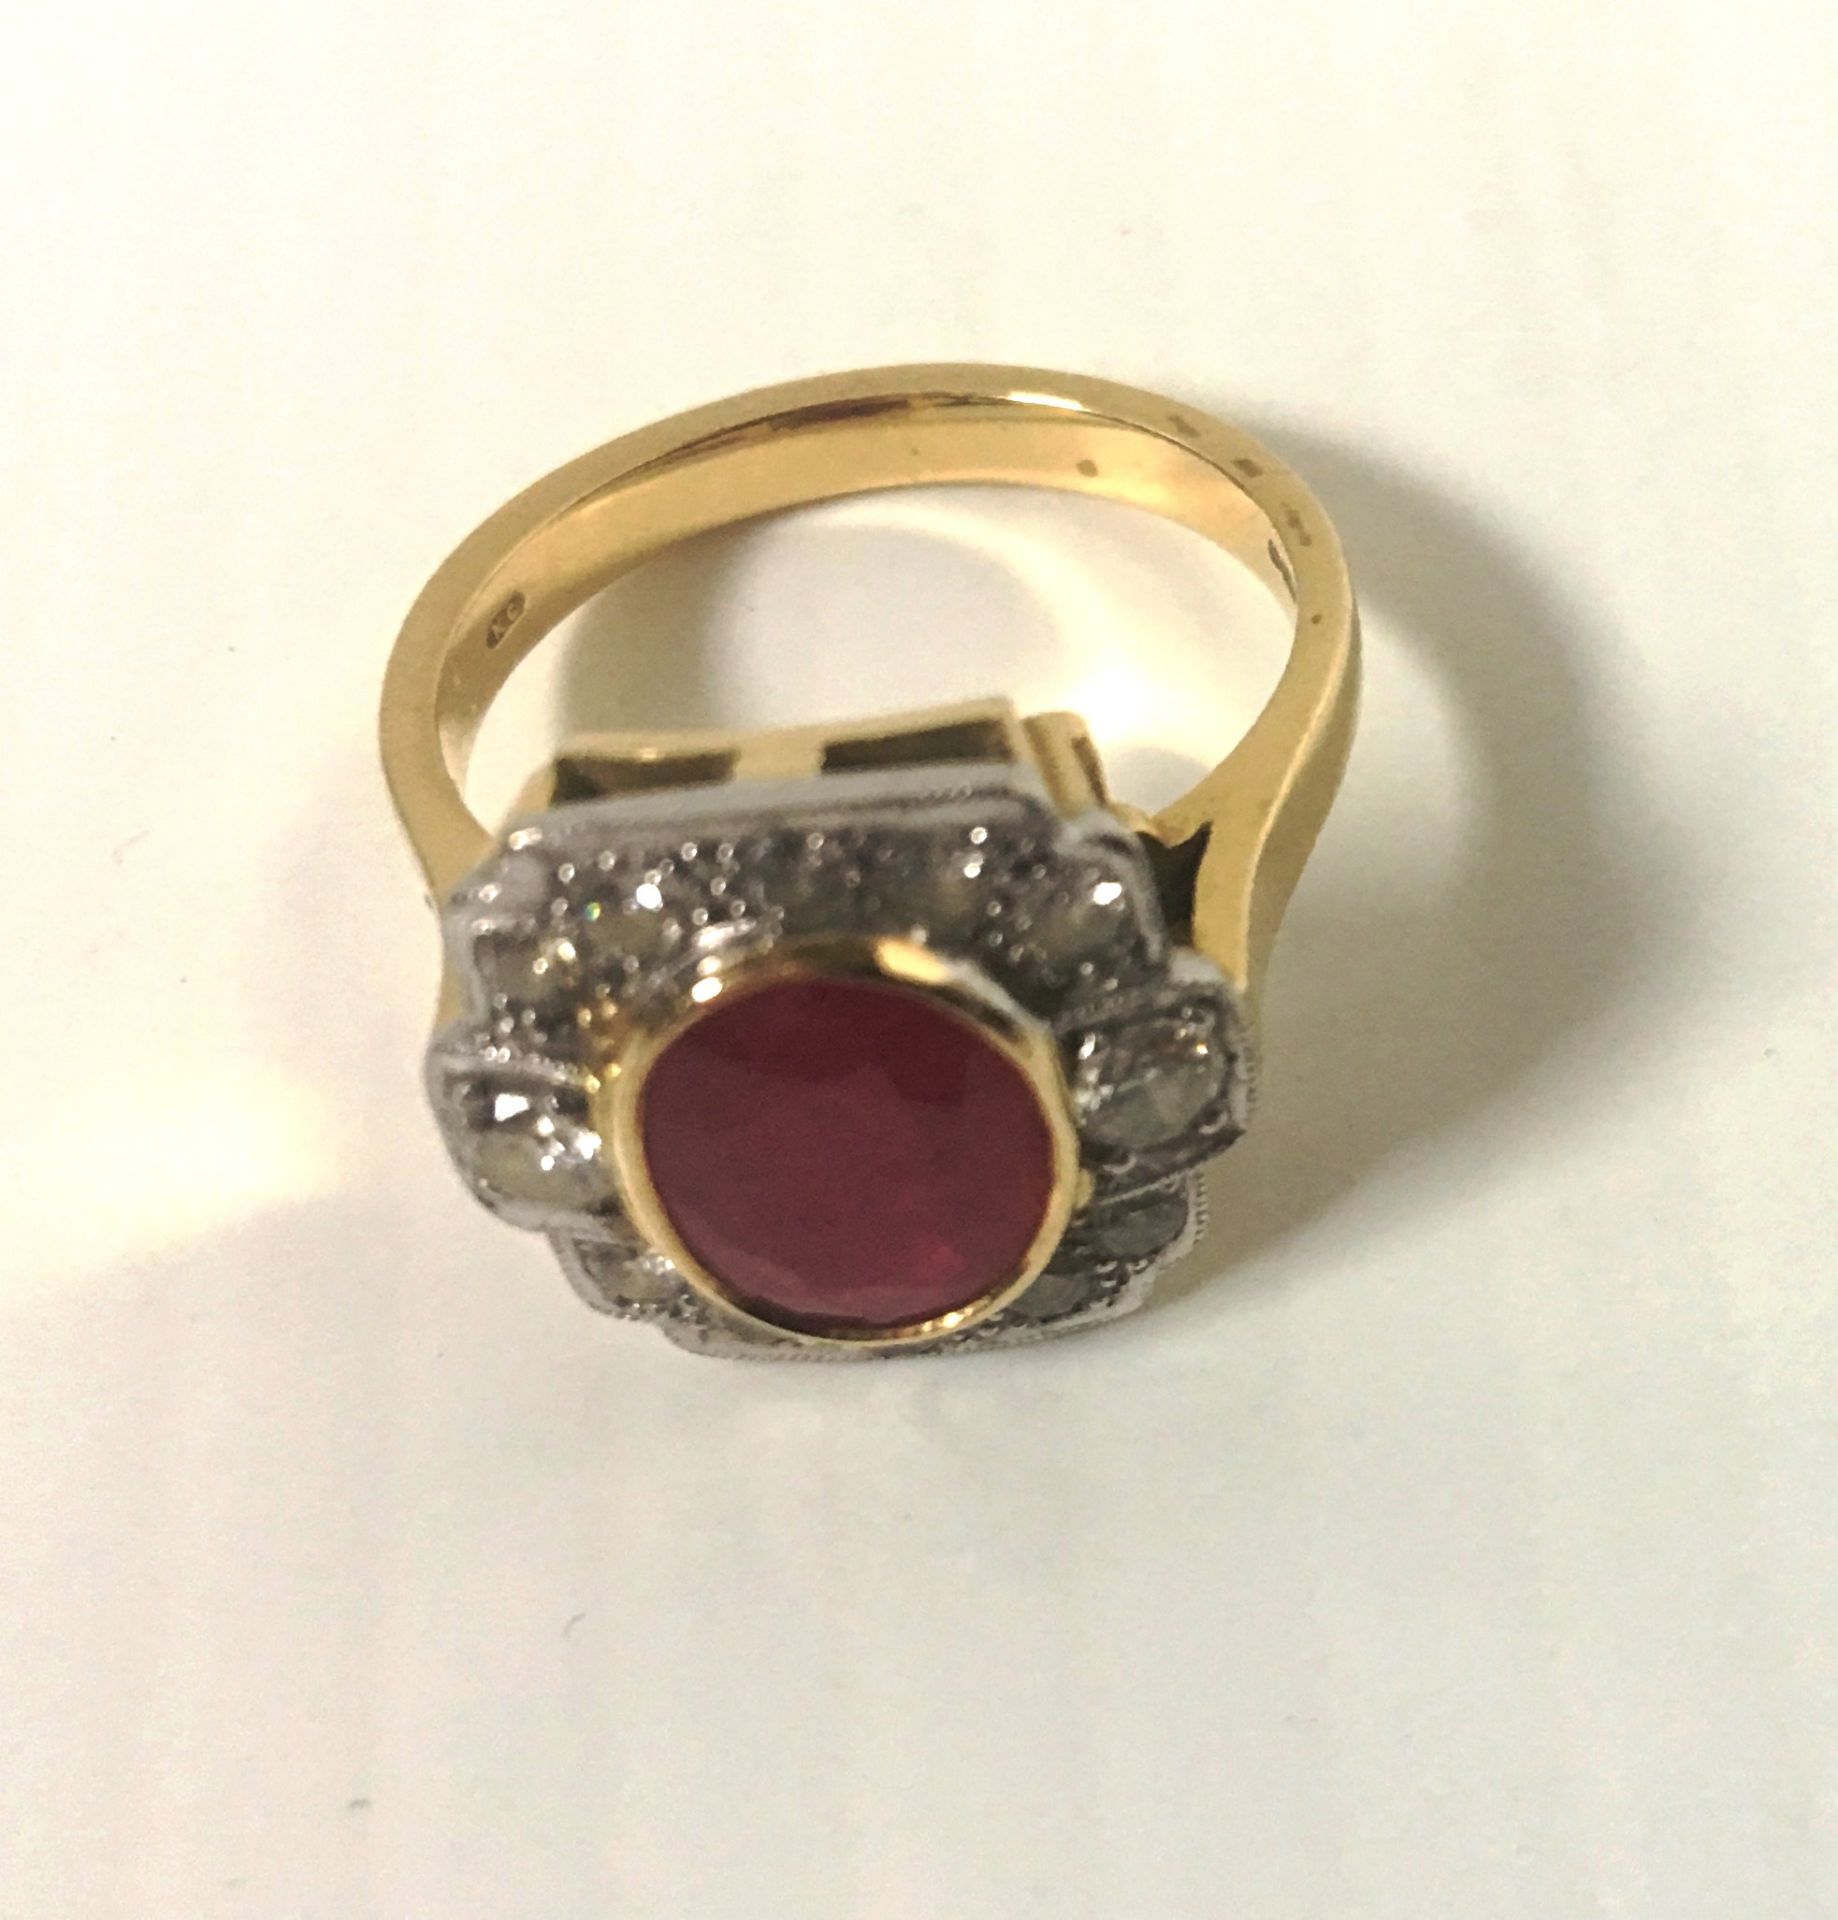 An Art Deco style ruby and diamond ring complete with valuation certificate which details the ring - Image 5 of 8